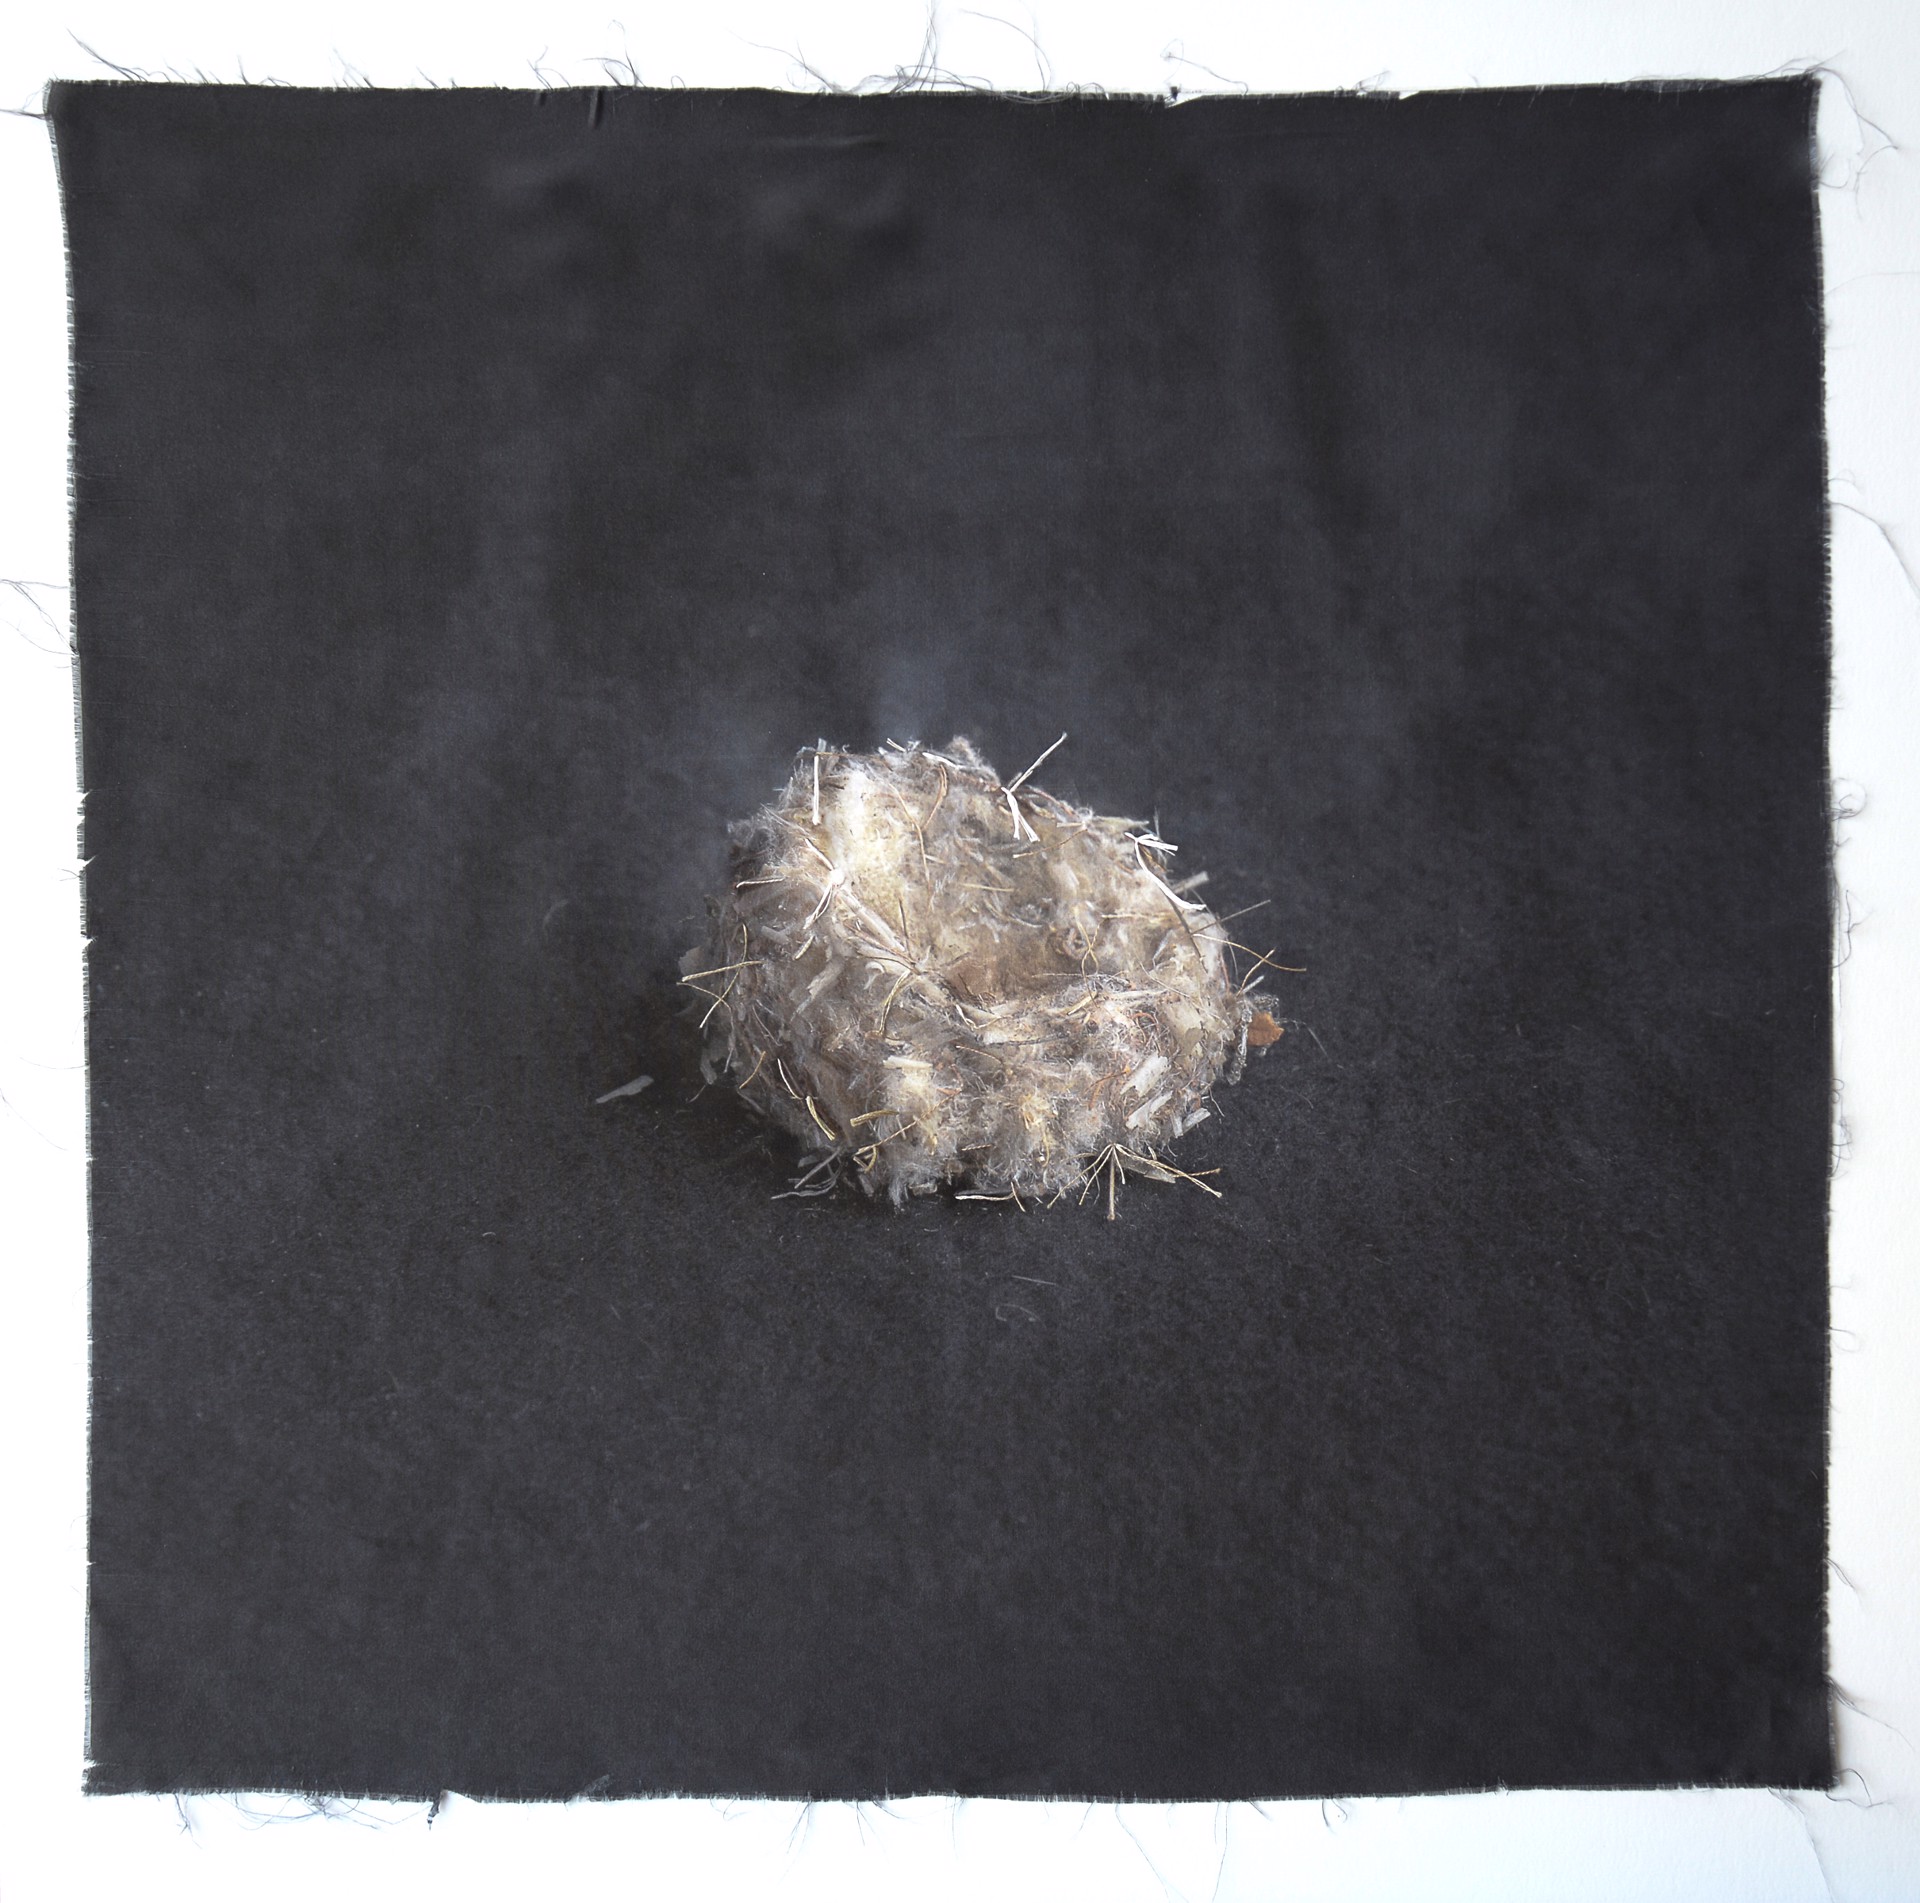 Untitled Nests #15 by Kate Breakey